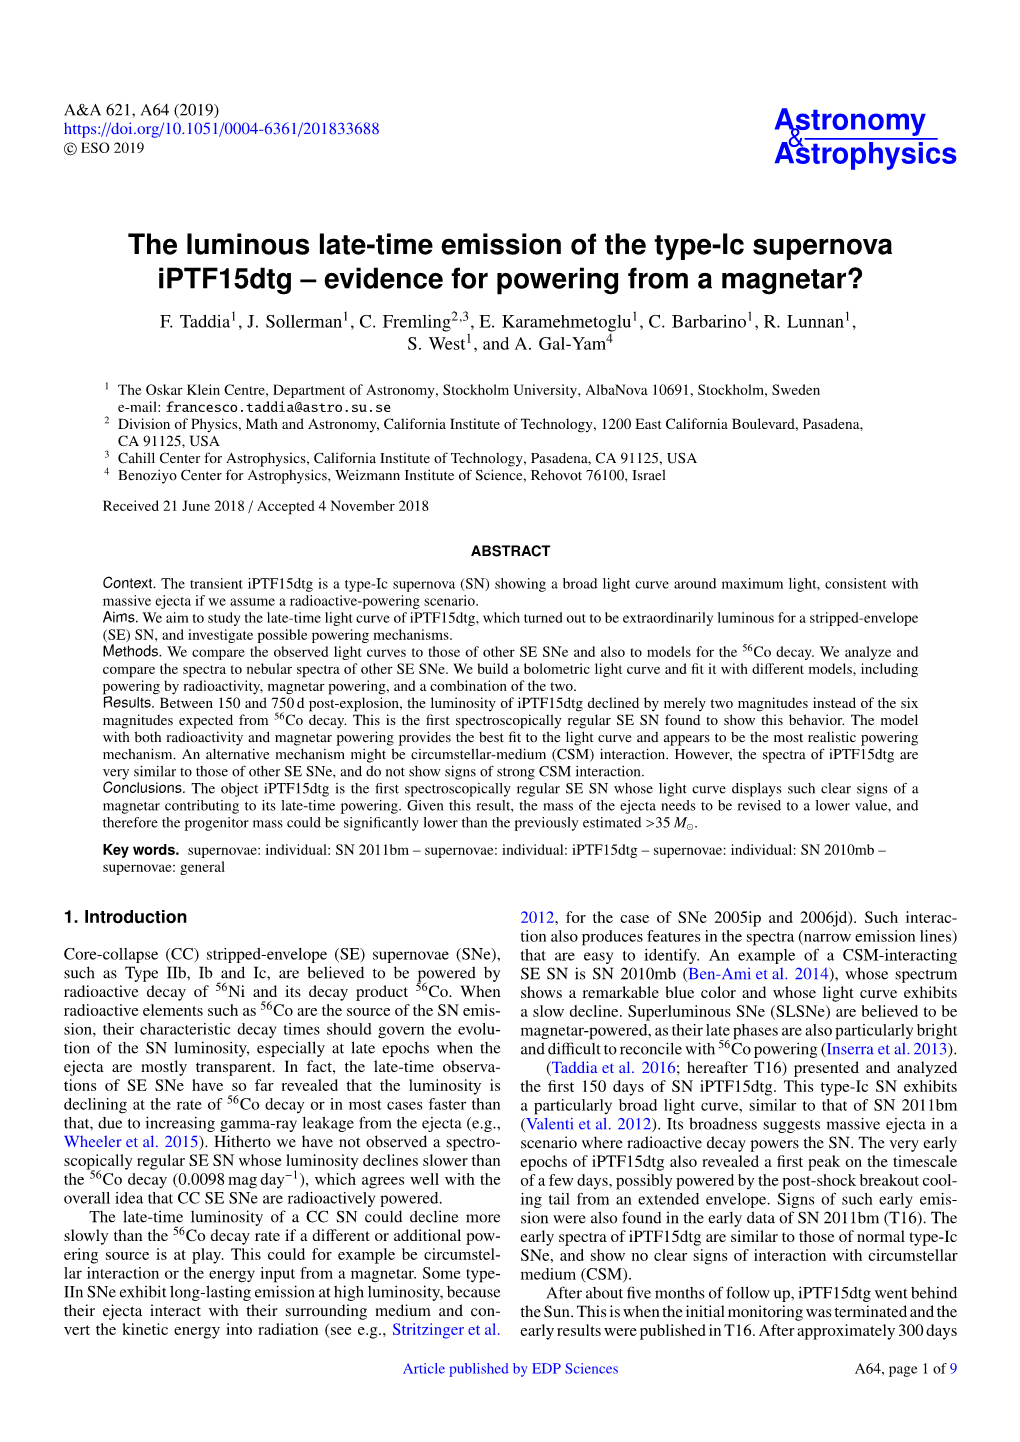 The Luminous Late-Time Emission of the Type-Ic Supernova Iptf15dtg – Evidence for Powering from a Magnetar?